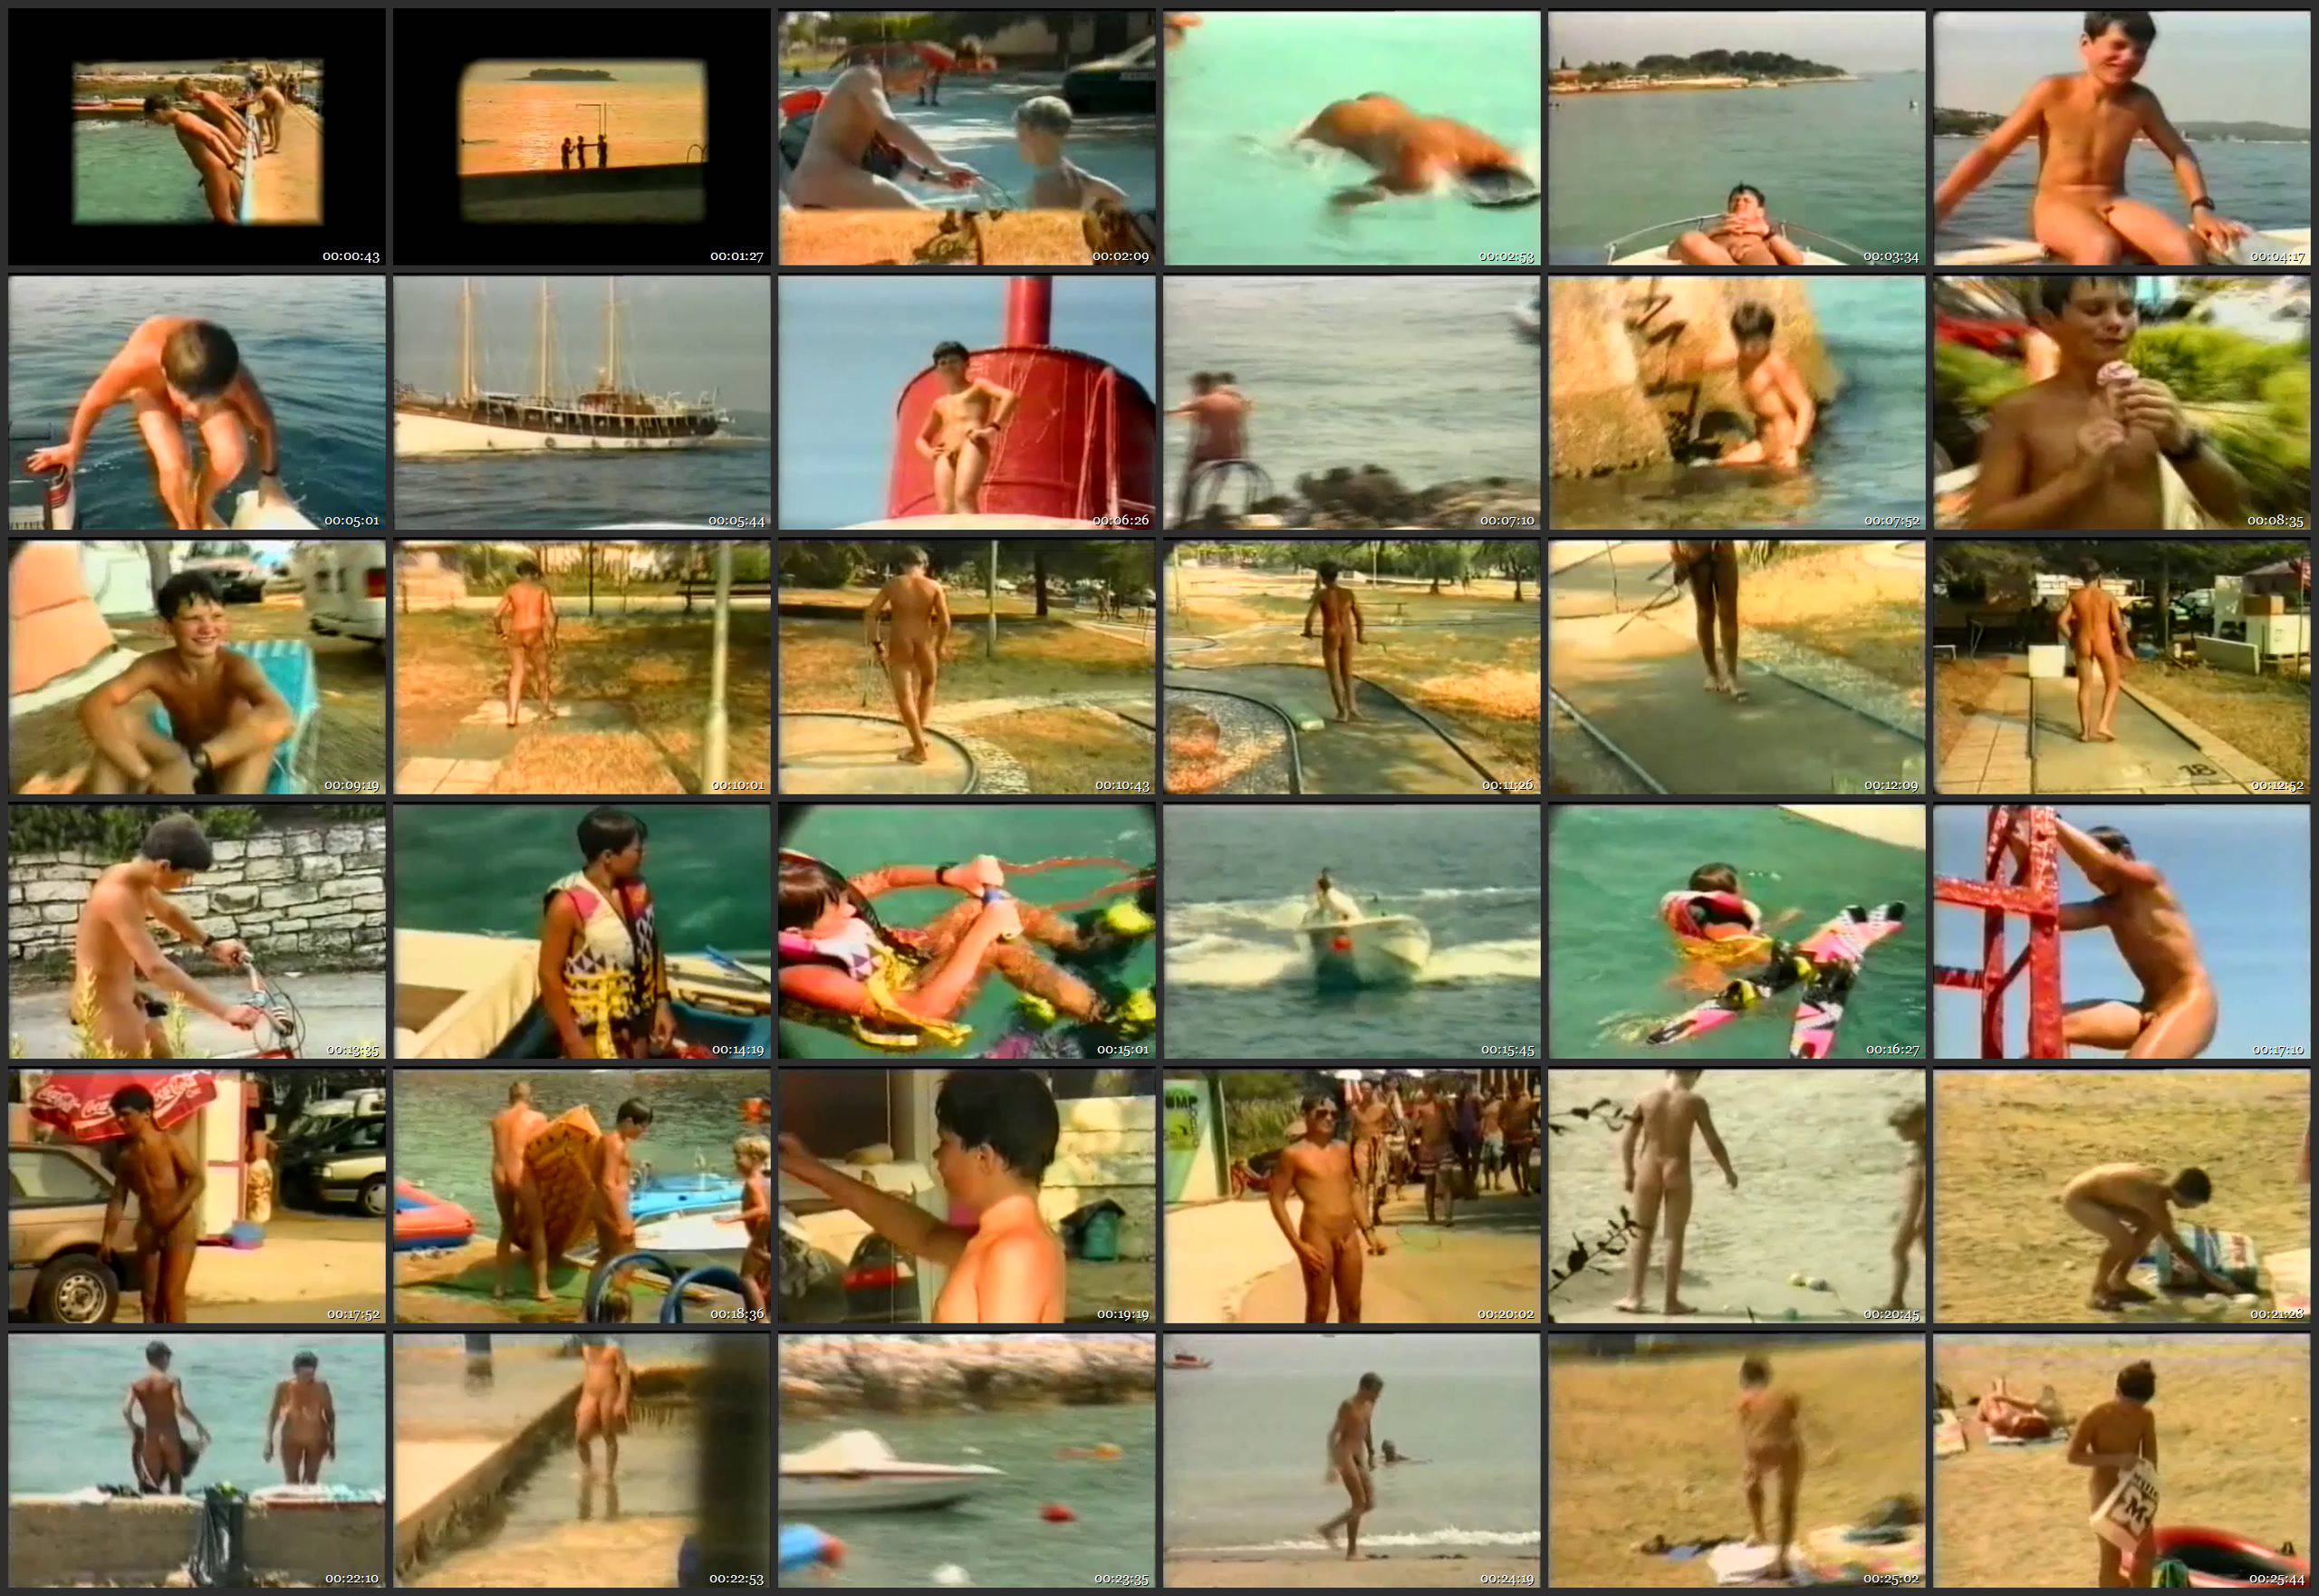 Nudist Movies-On The Land and In The Water - Nudist Boys Video - Thumbnails